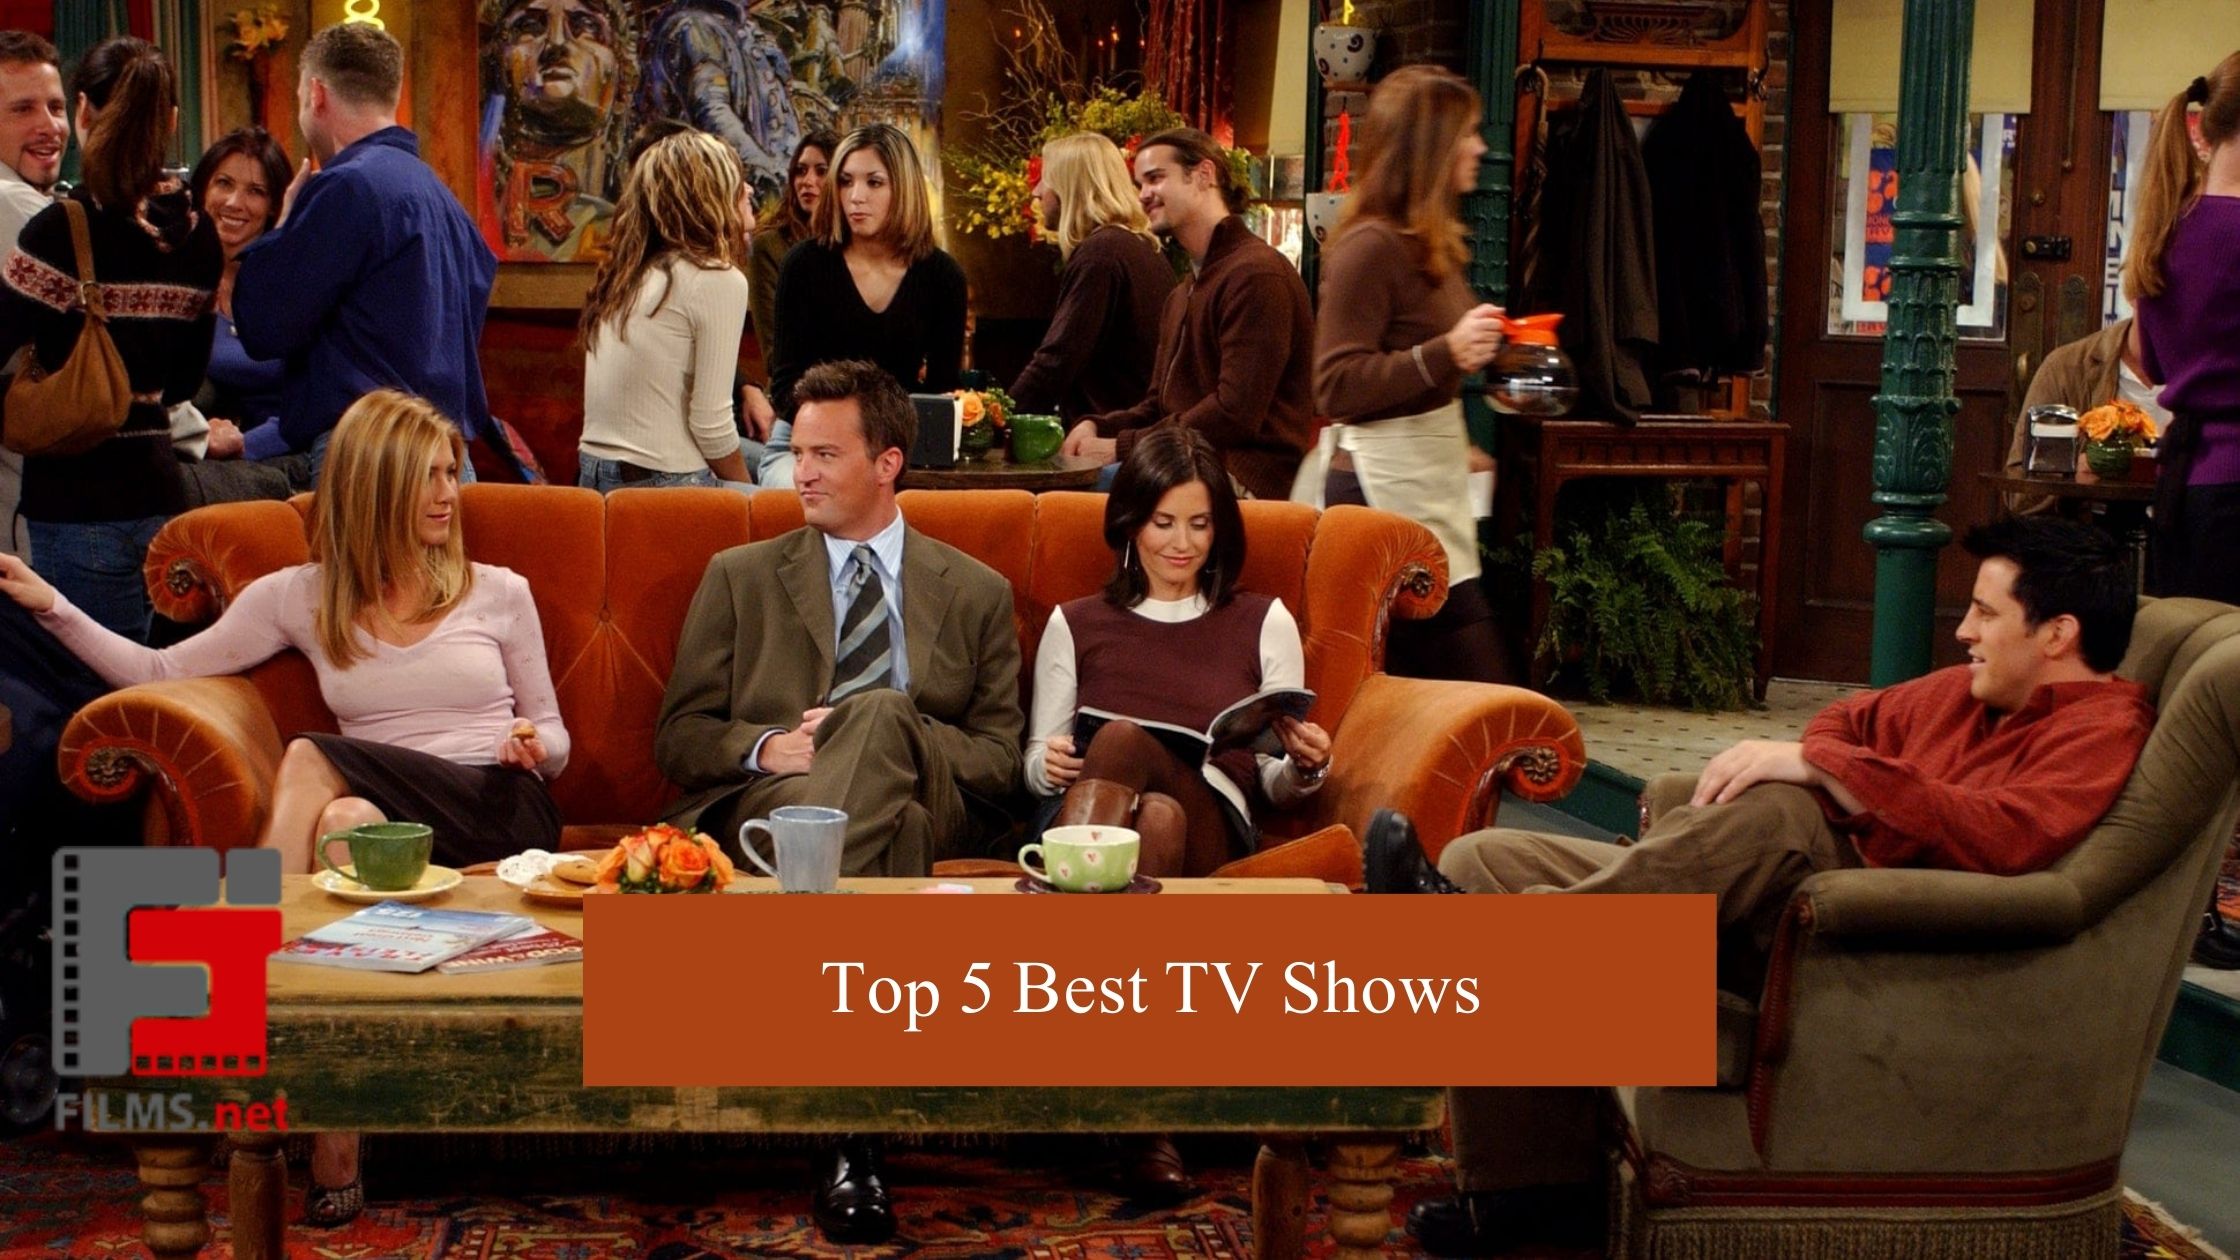 Top 5 Best TV Shows Set in the New York Which Actually Films in the New York City